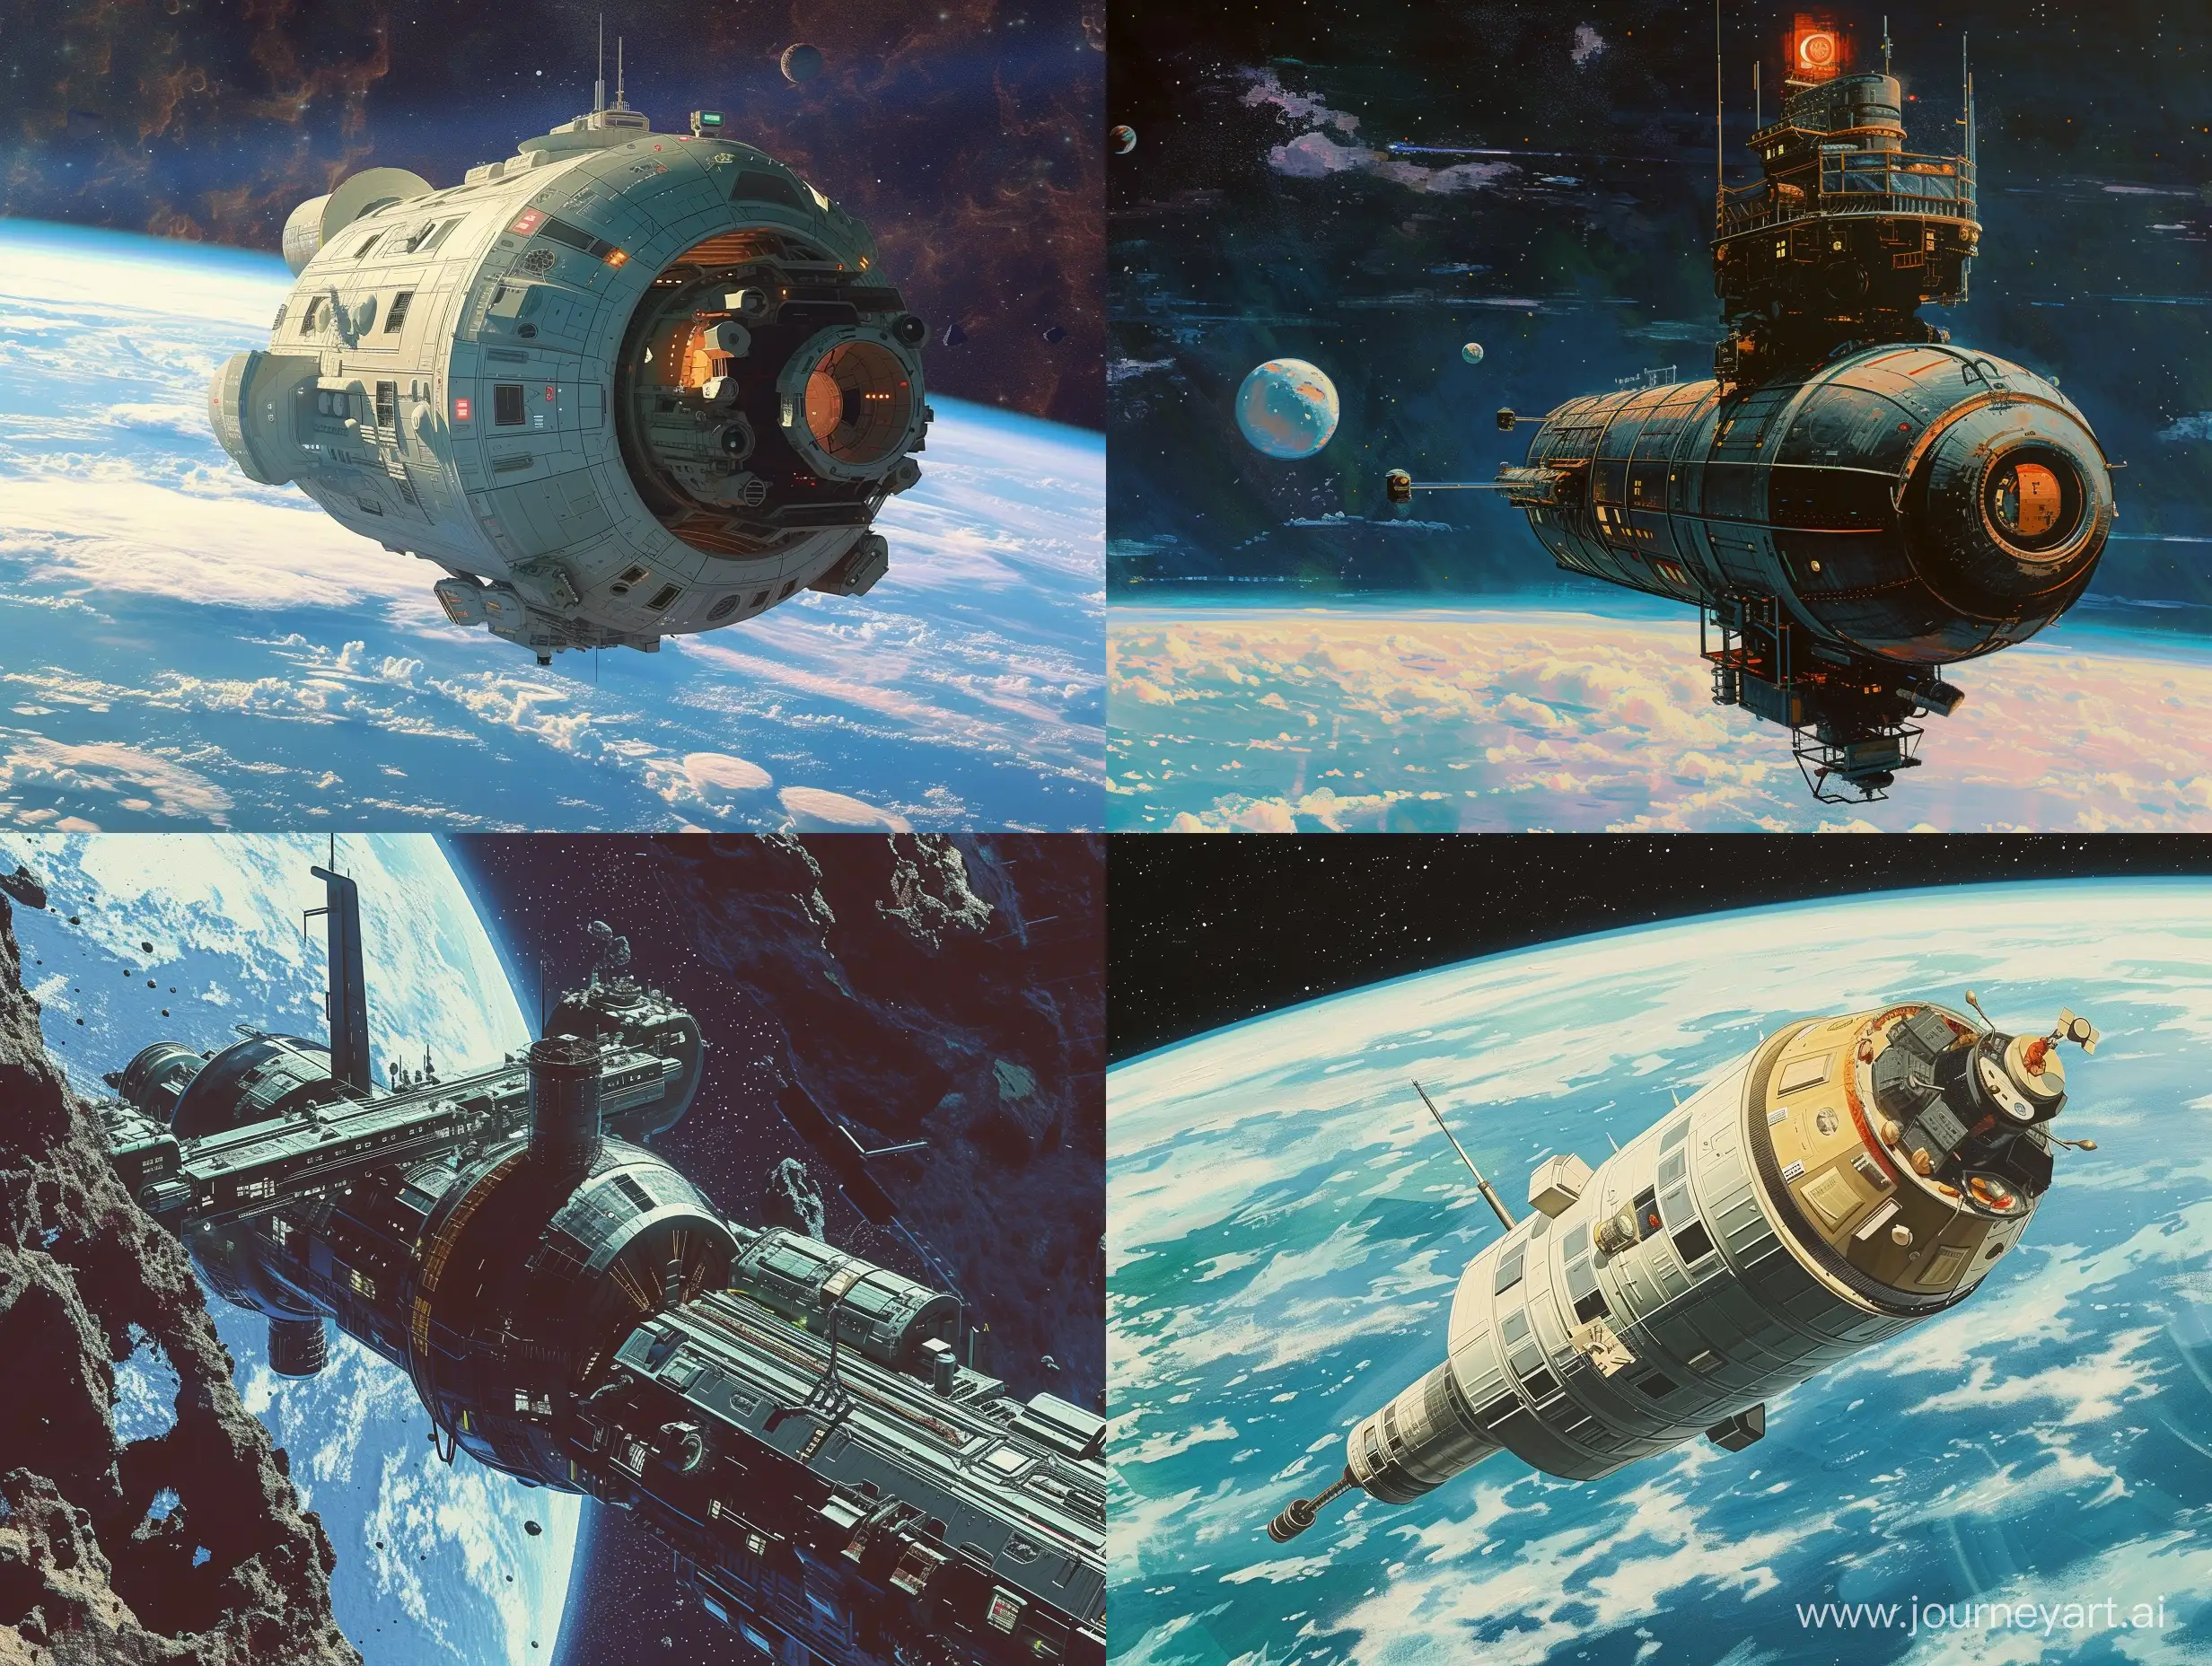 The illustration features a futuristic design with realistic textures and a retro-futuristic aesthetic. It depicts a space station floating in space with a nostalgic 80s and 70s retrofuturism vibe. It is a full view artwork reminiscent of Norman Rockwell's painting.



